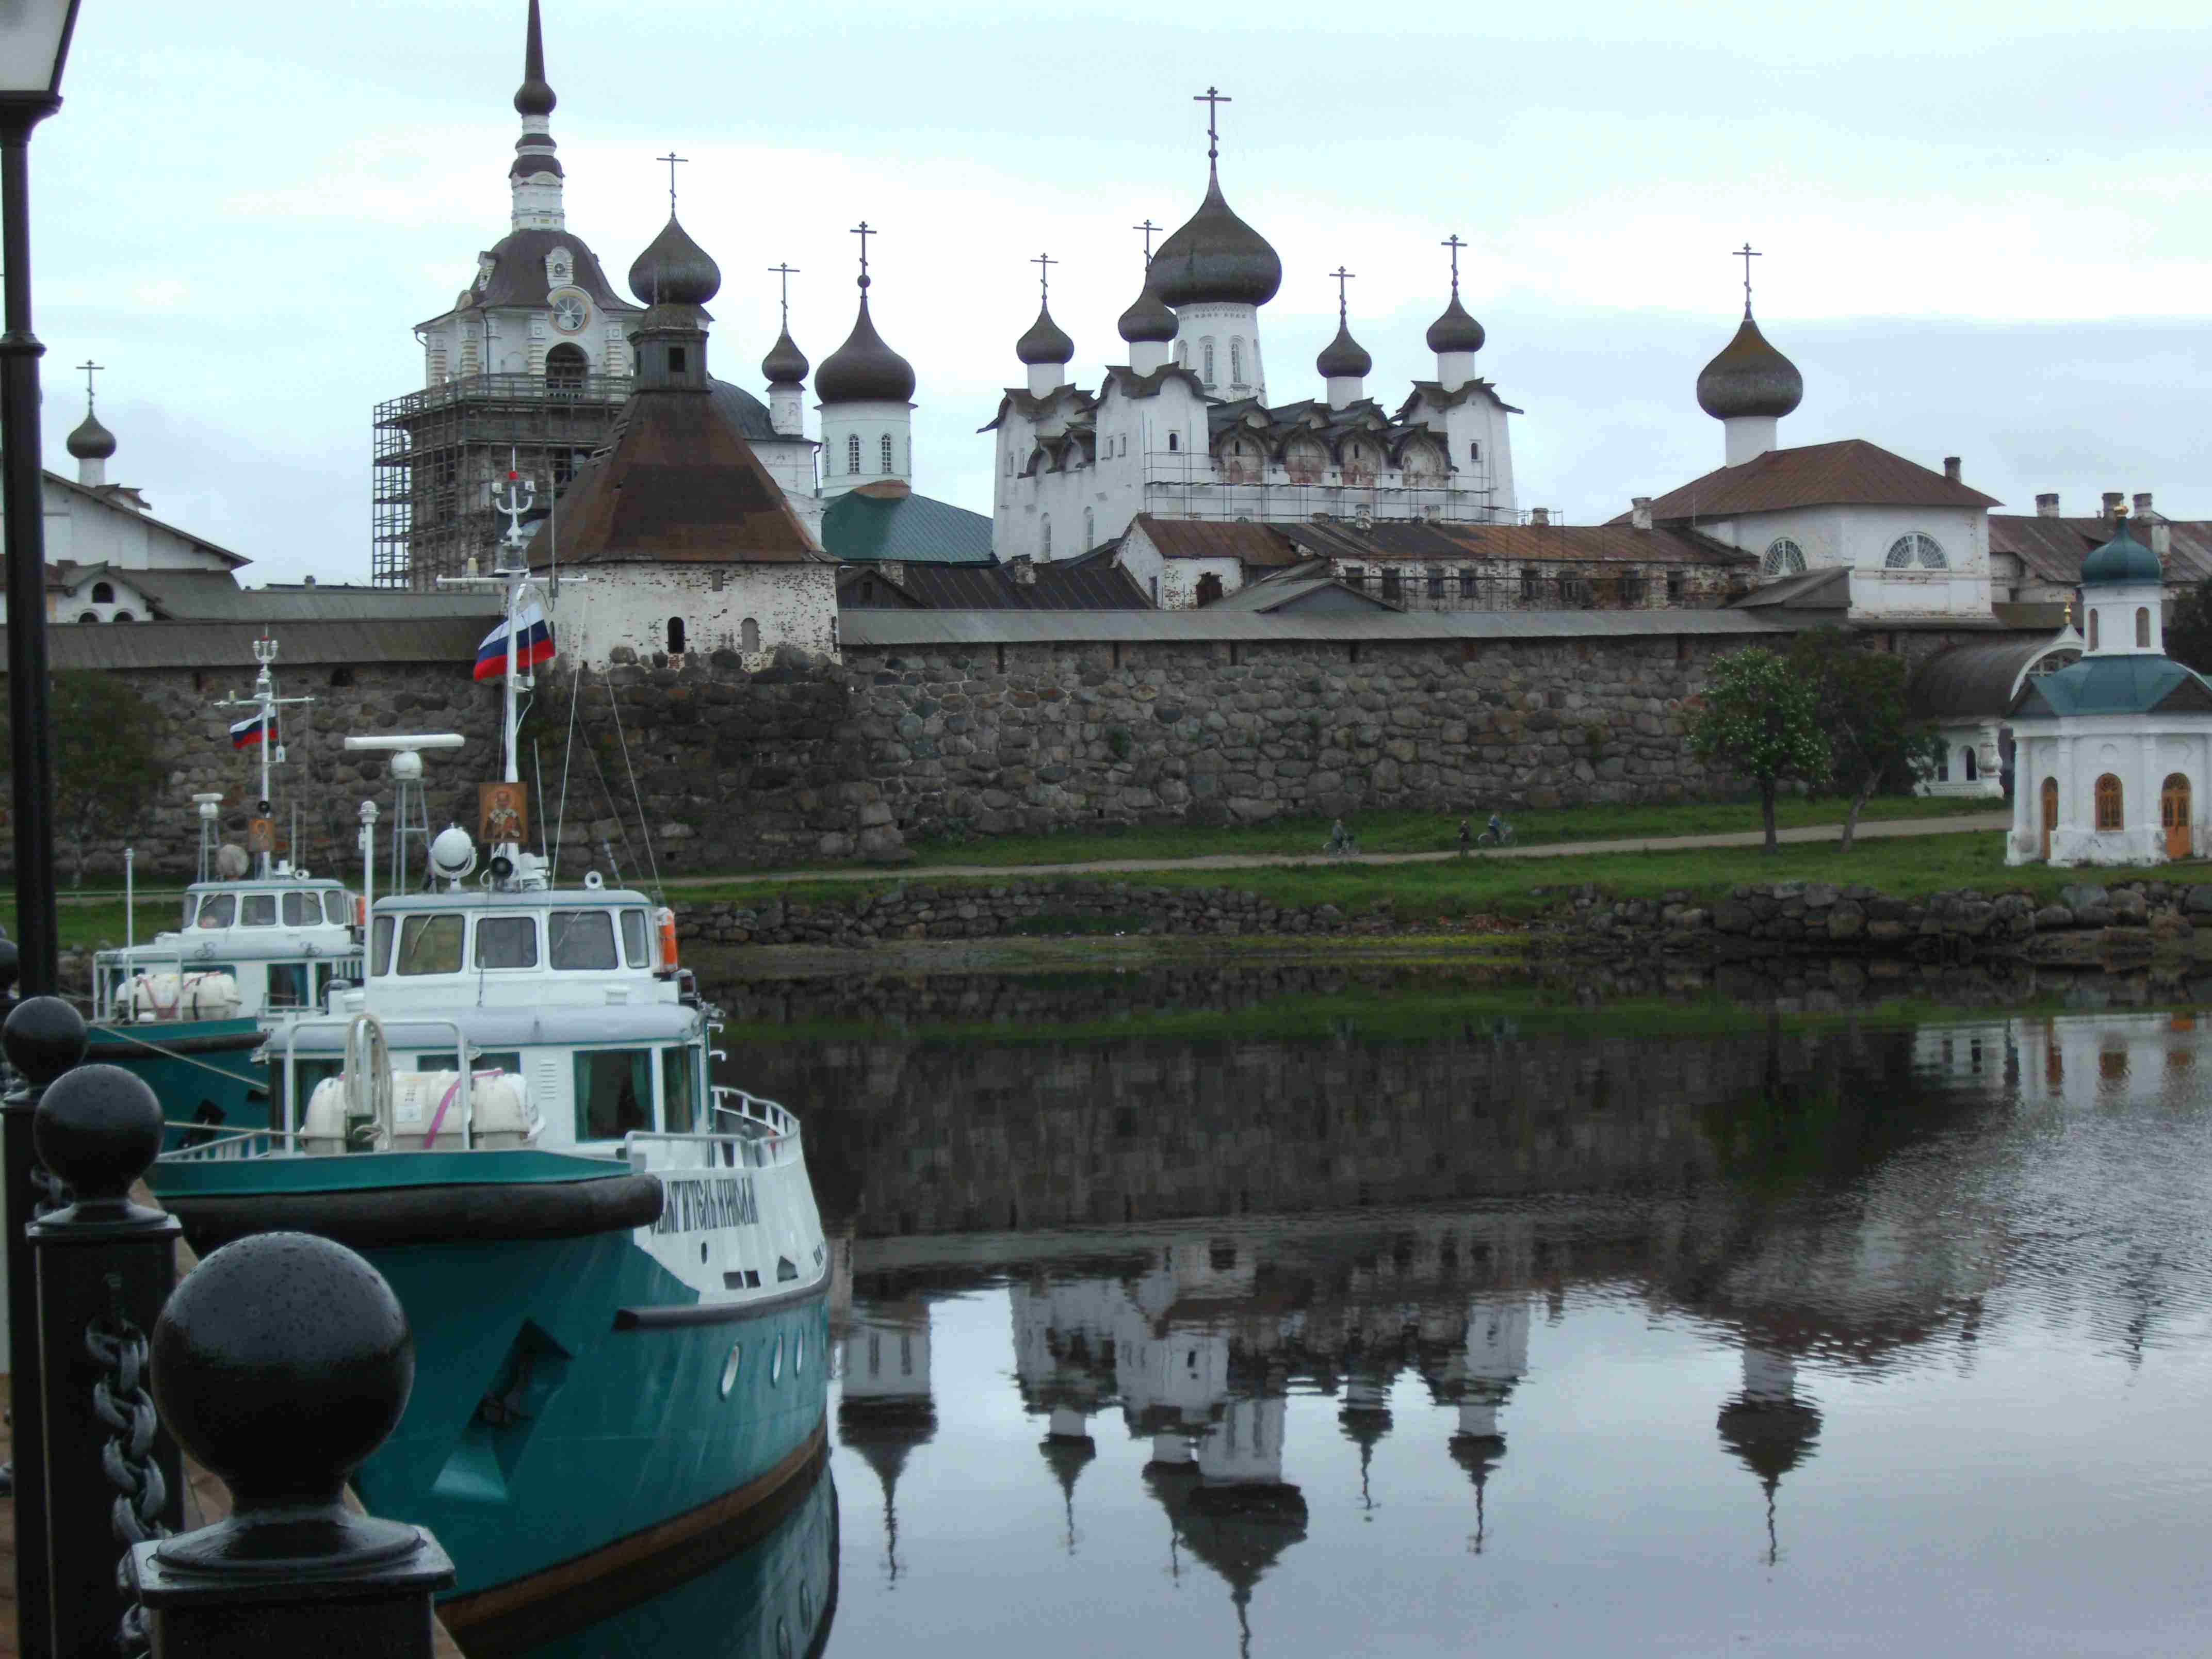 The Solovetsky Fortified Monastery